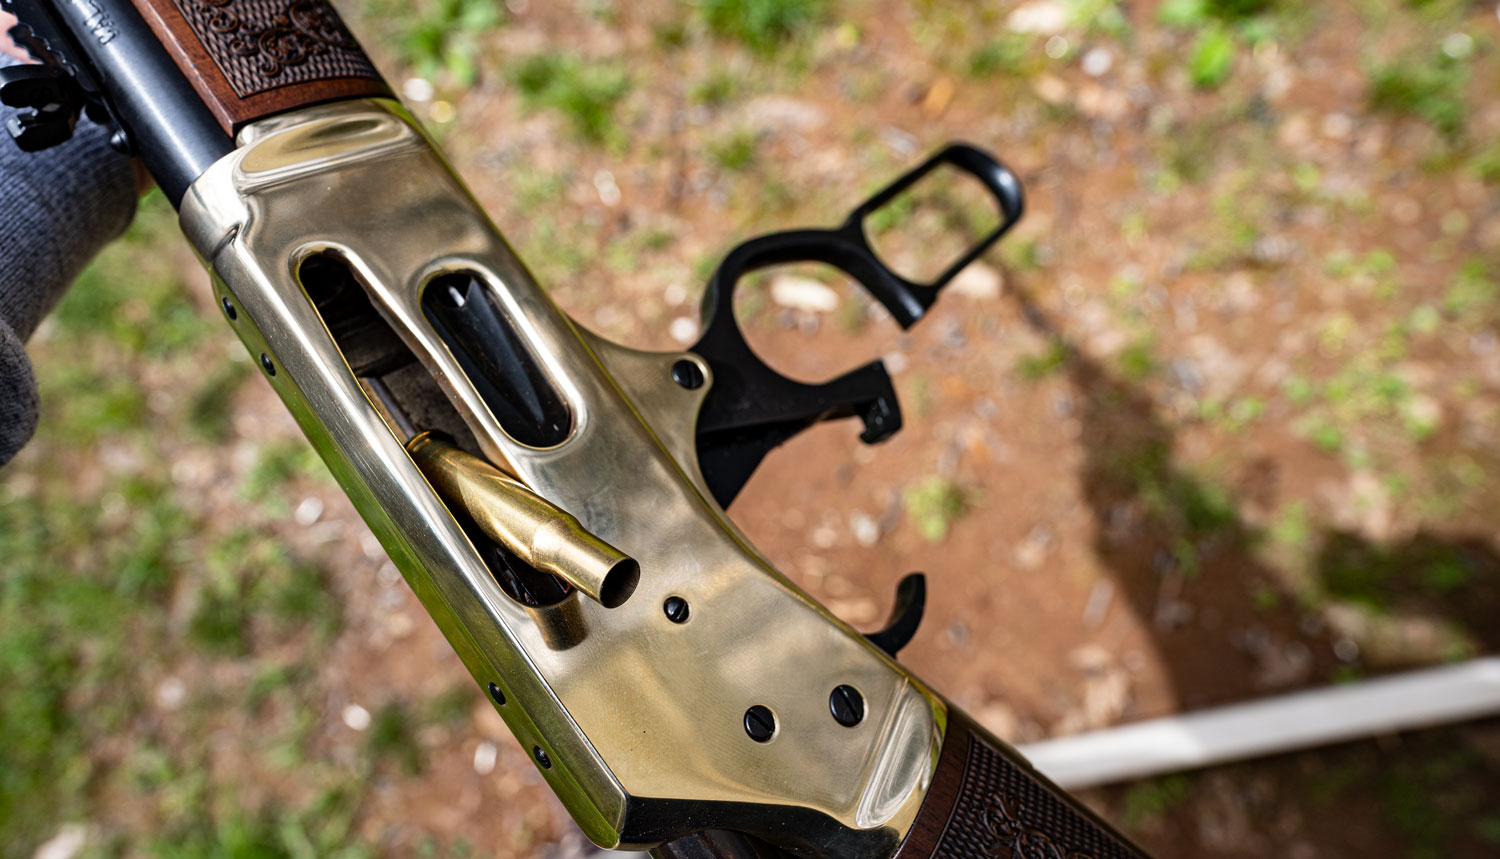 Hornady casing being ejected from a lever action rifle